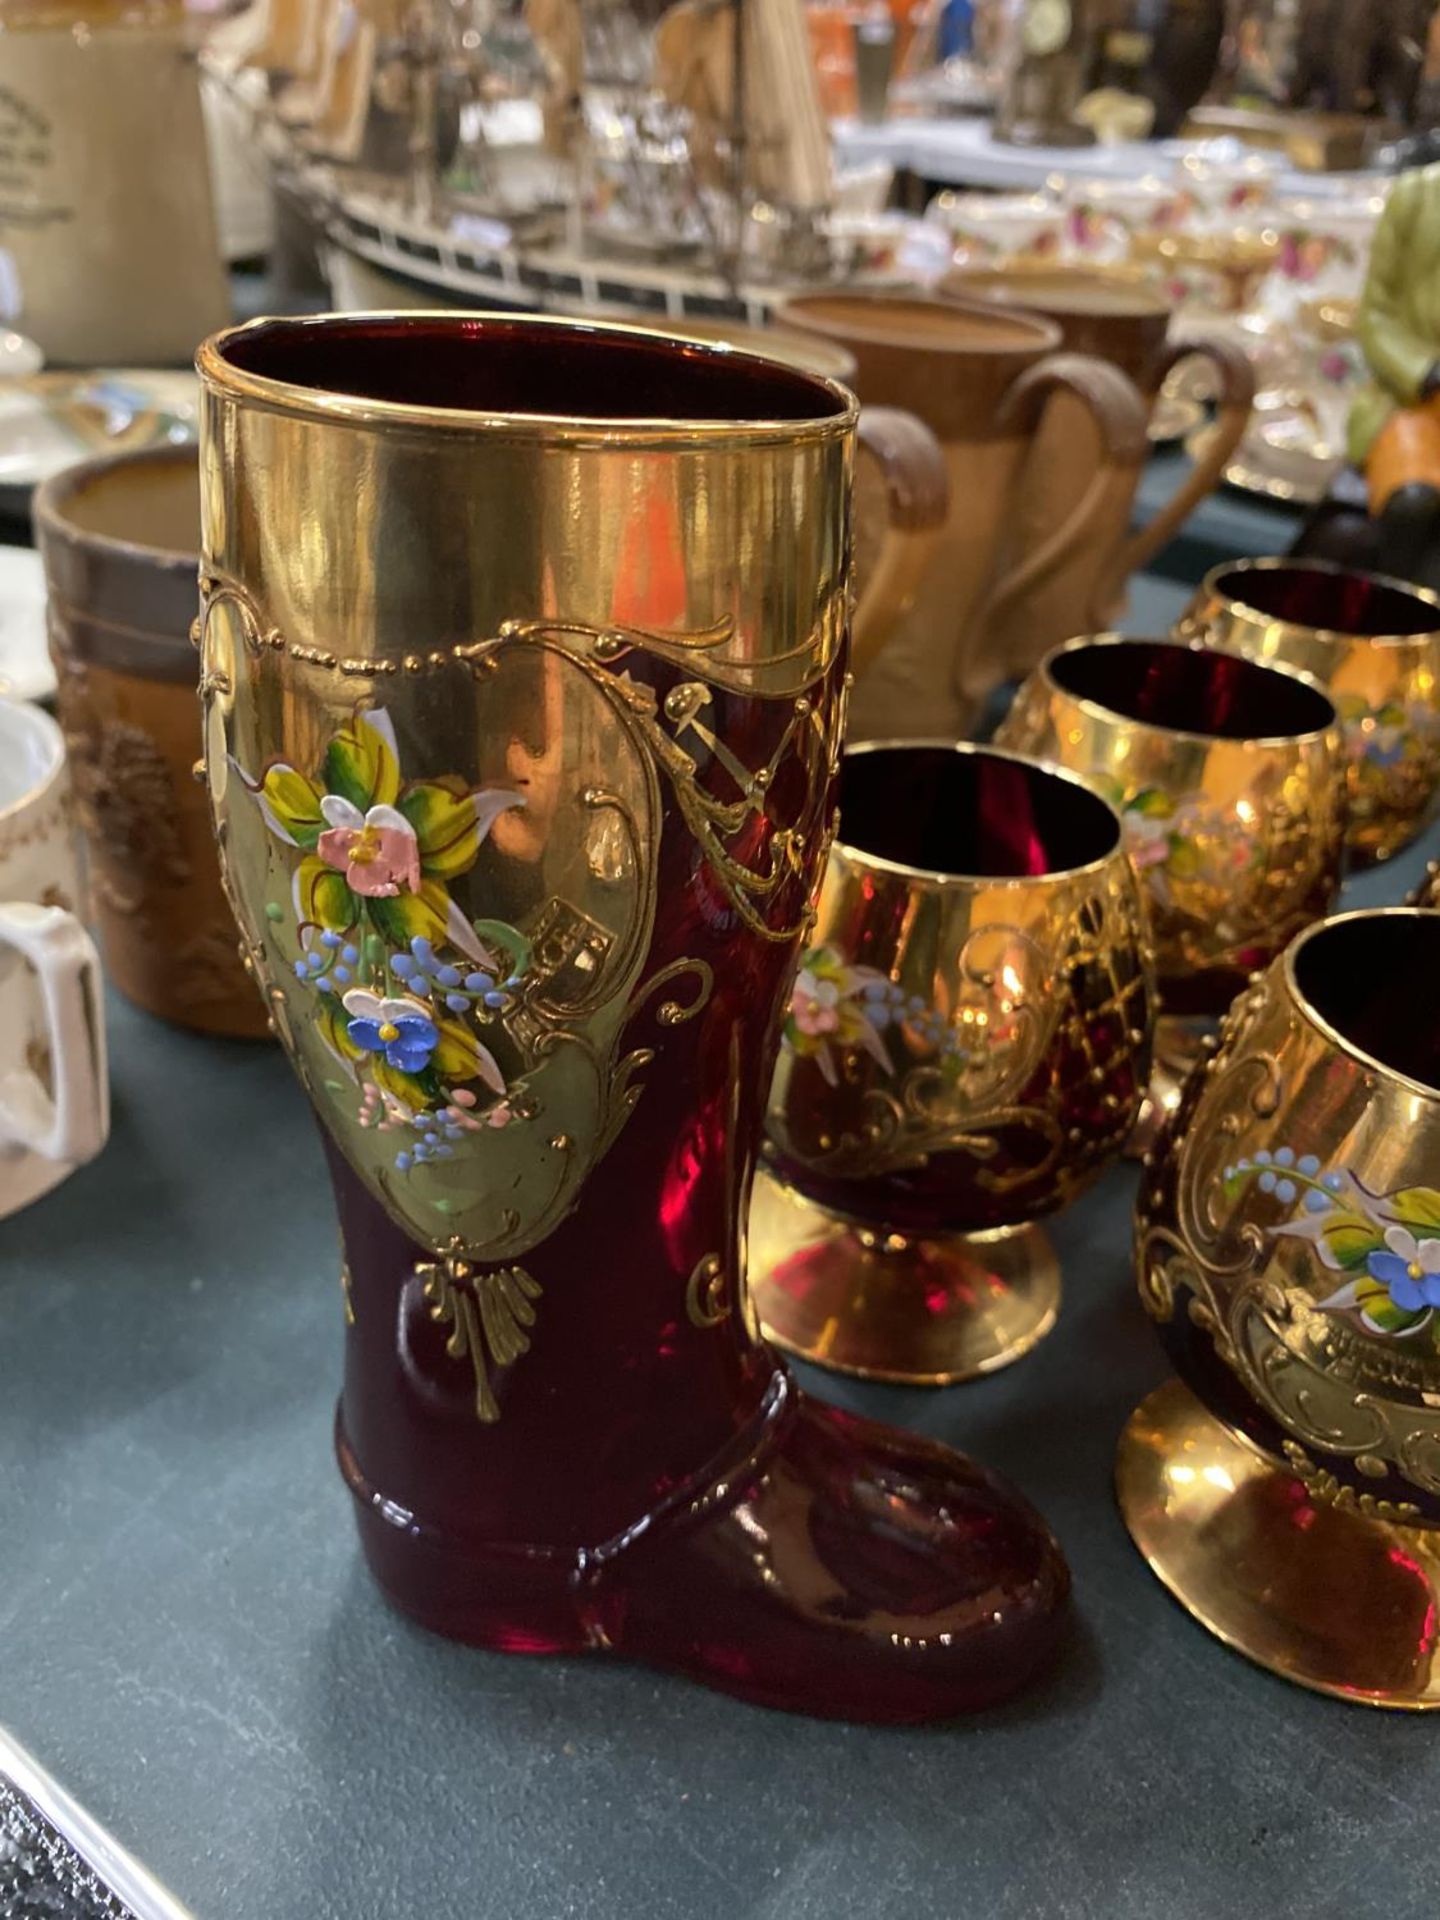 SIX GILDED DECORATIVE RED GLASSES AND A MATCHING BOOT - Image 2 of 3